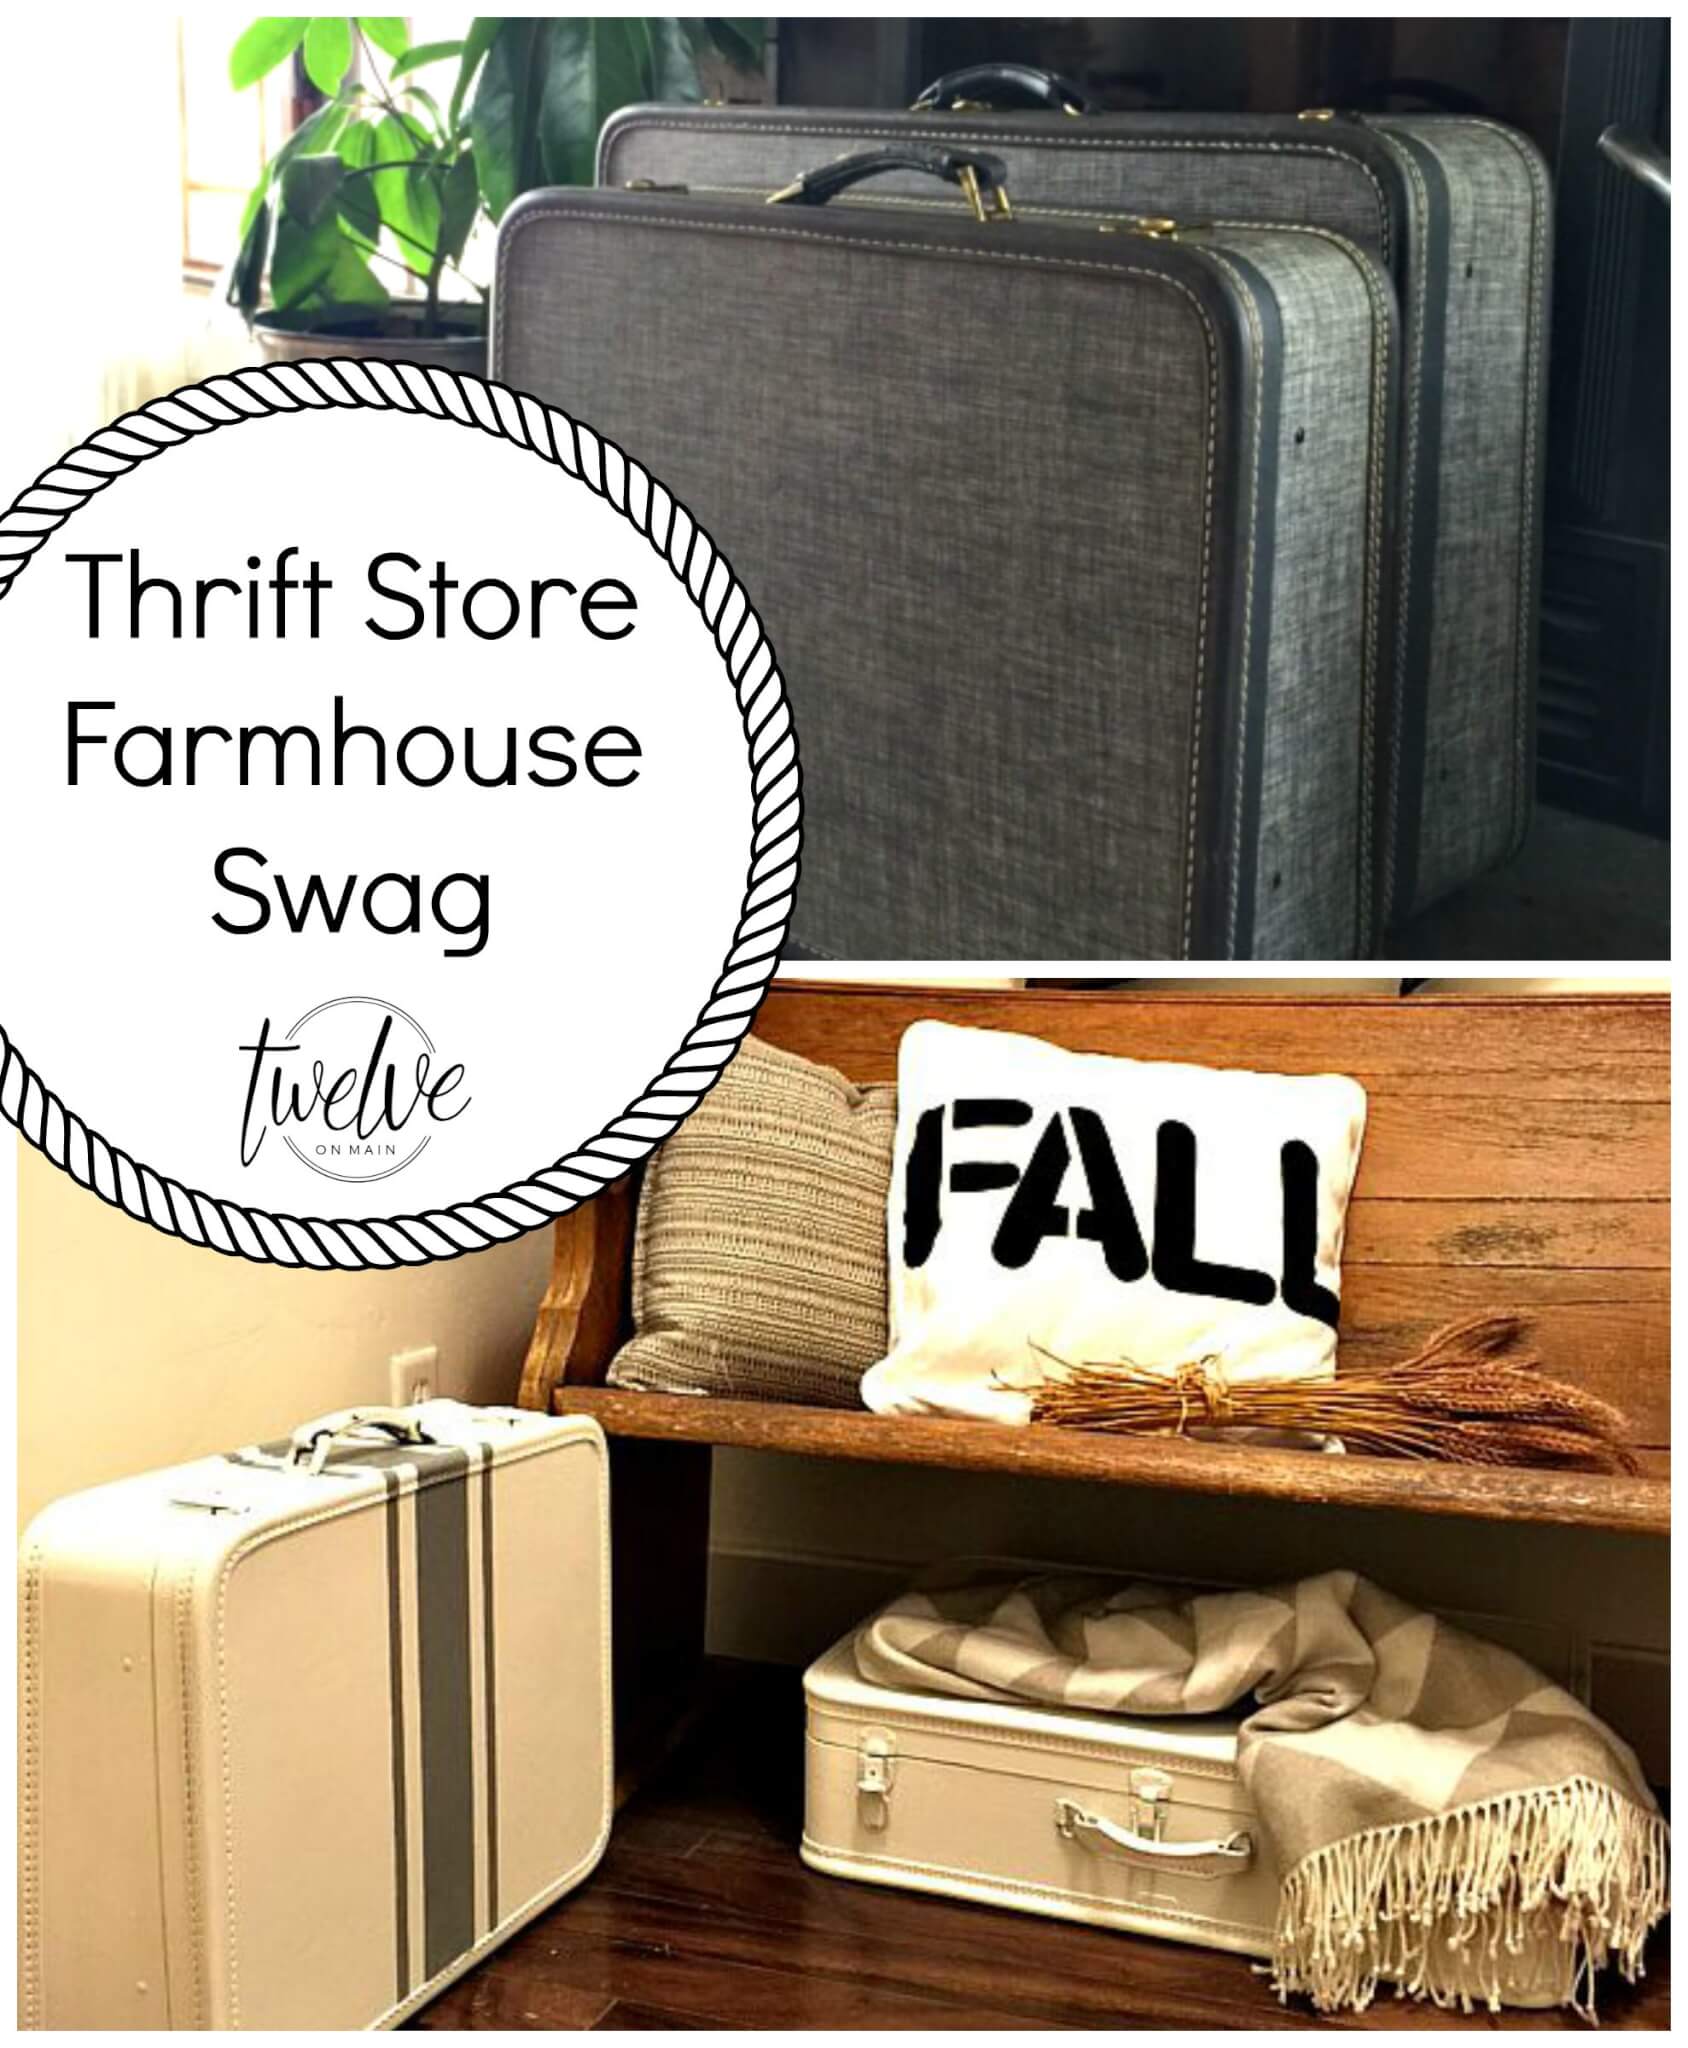 Thrift Store Farmhouse Swag Part 2